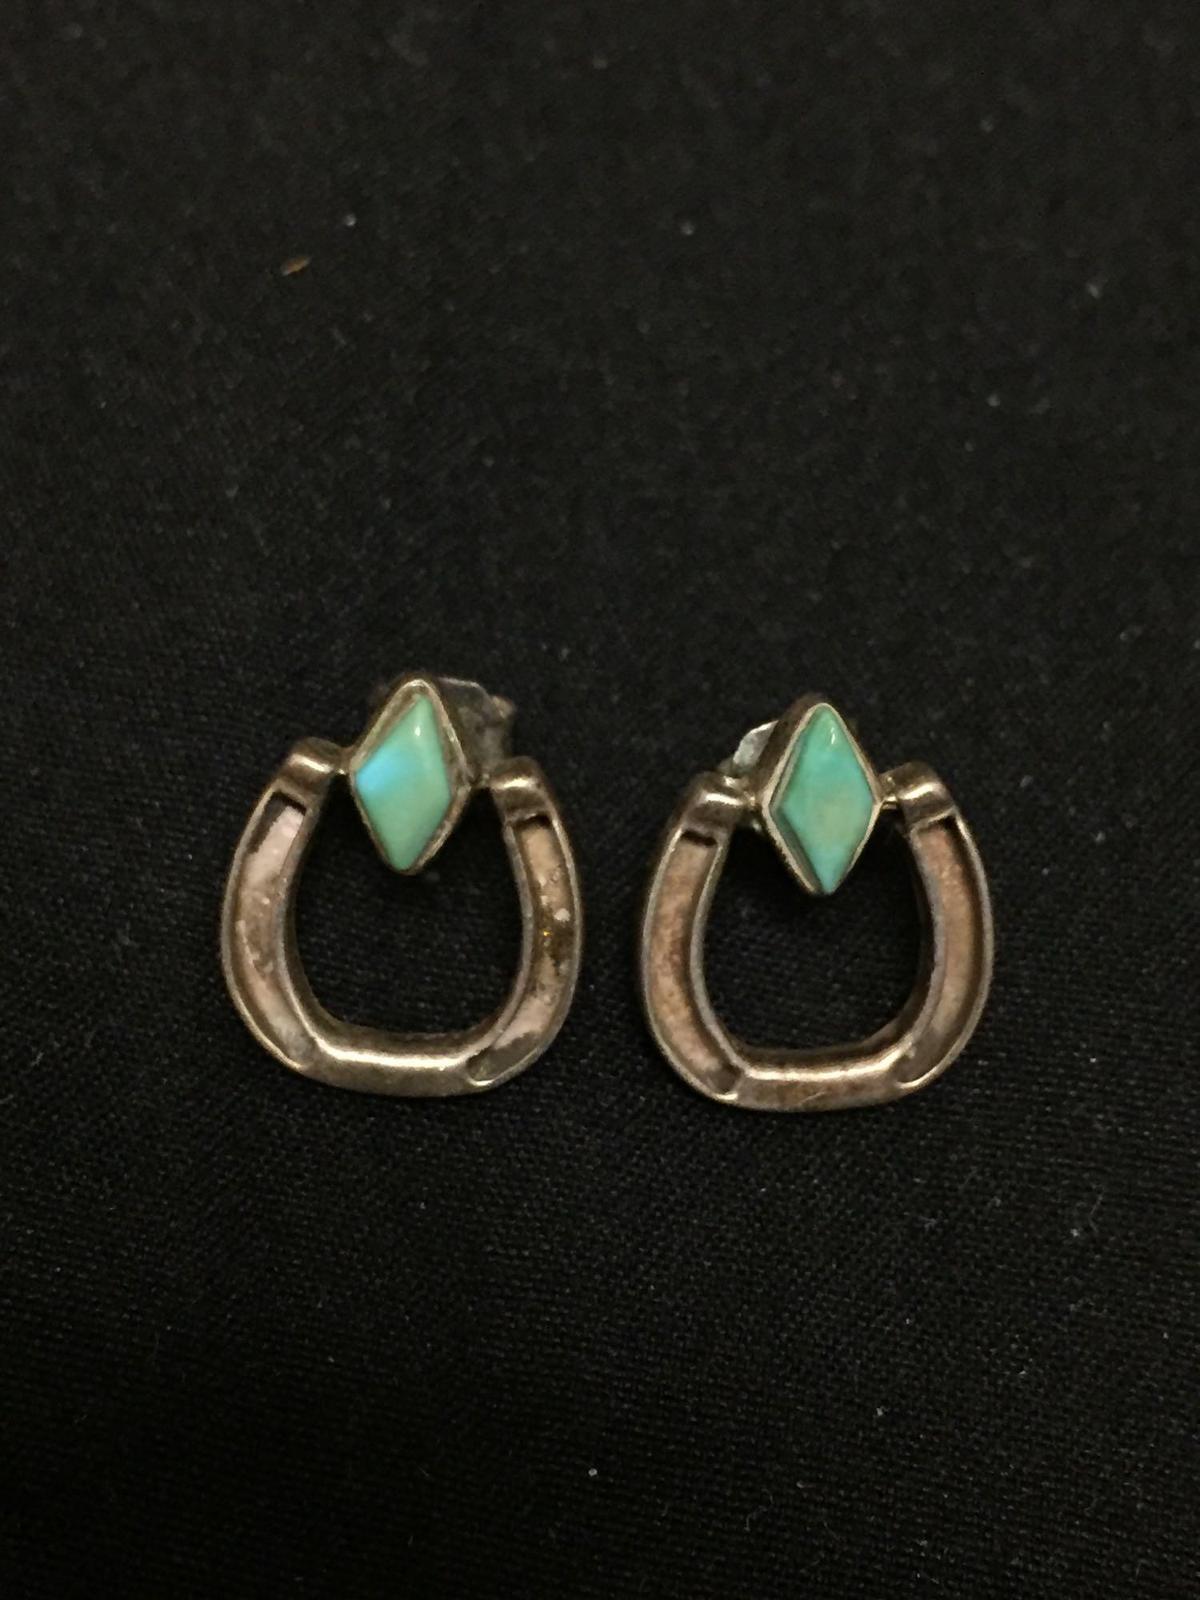 Lucky Horseshoe Design Pair of Sterling Silver Old Pawn Native American Earrings w/ Marquise